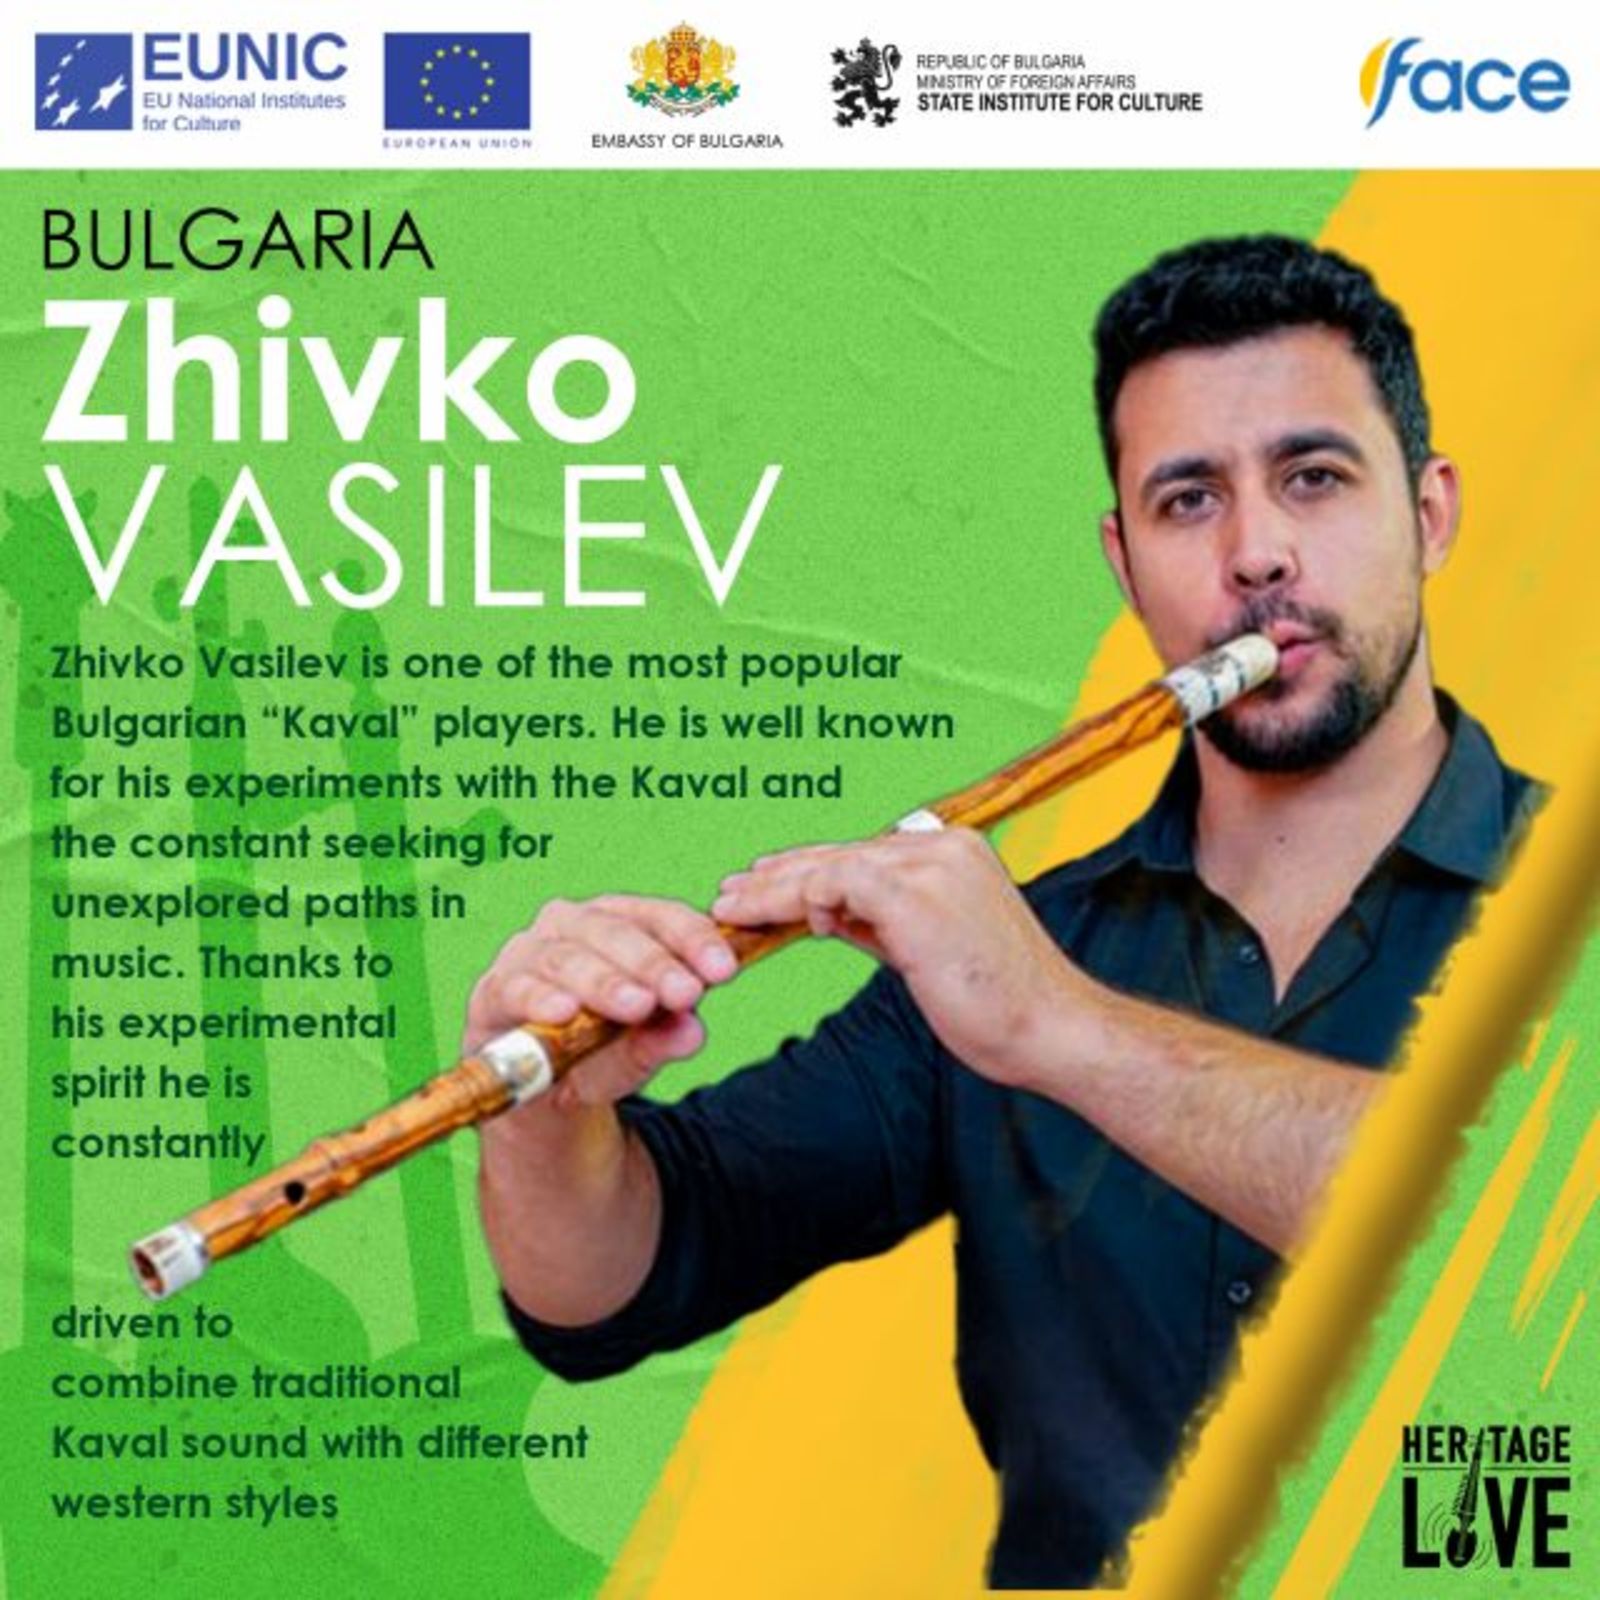 Bulgarian participation in the first project of the EUNIC cluster in Pakistan - "Heritage Live - Music of Pakistan"